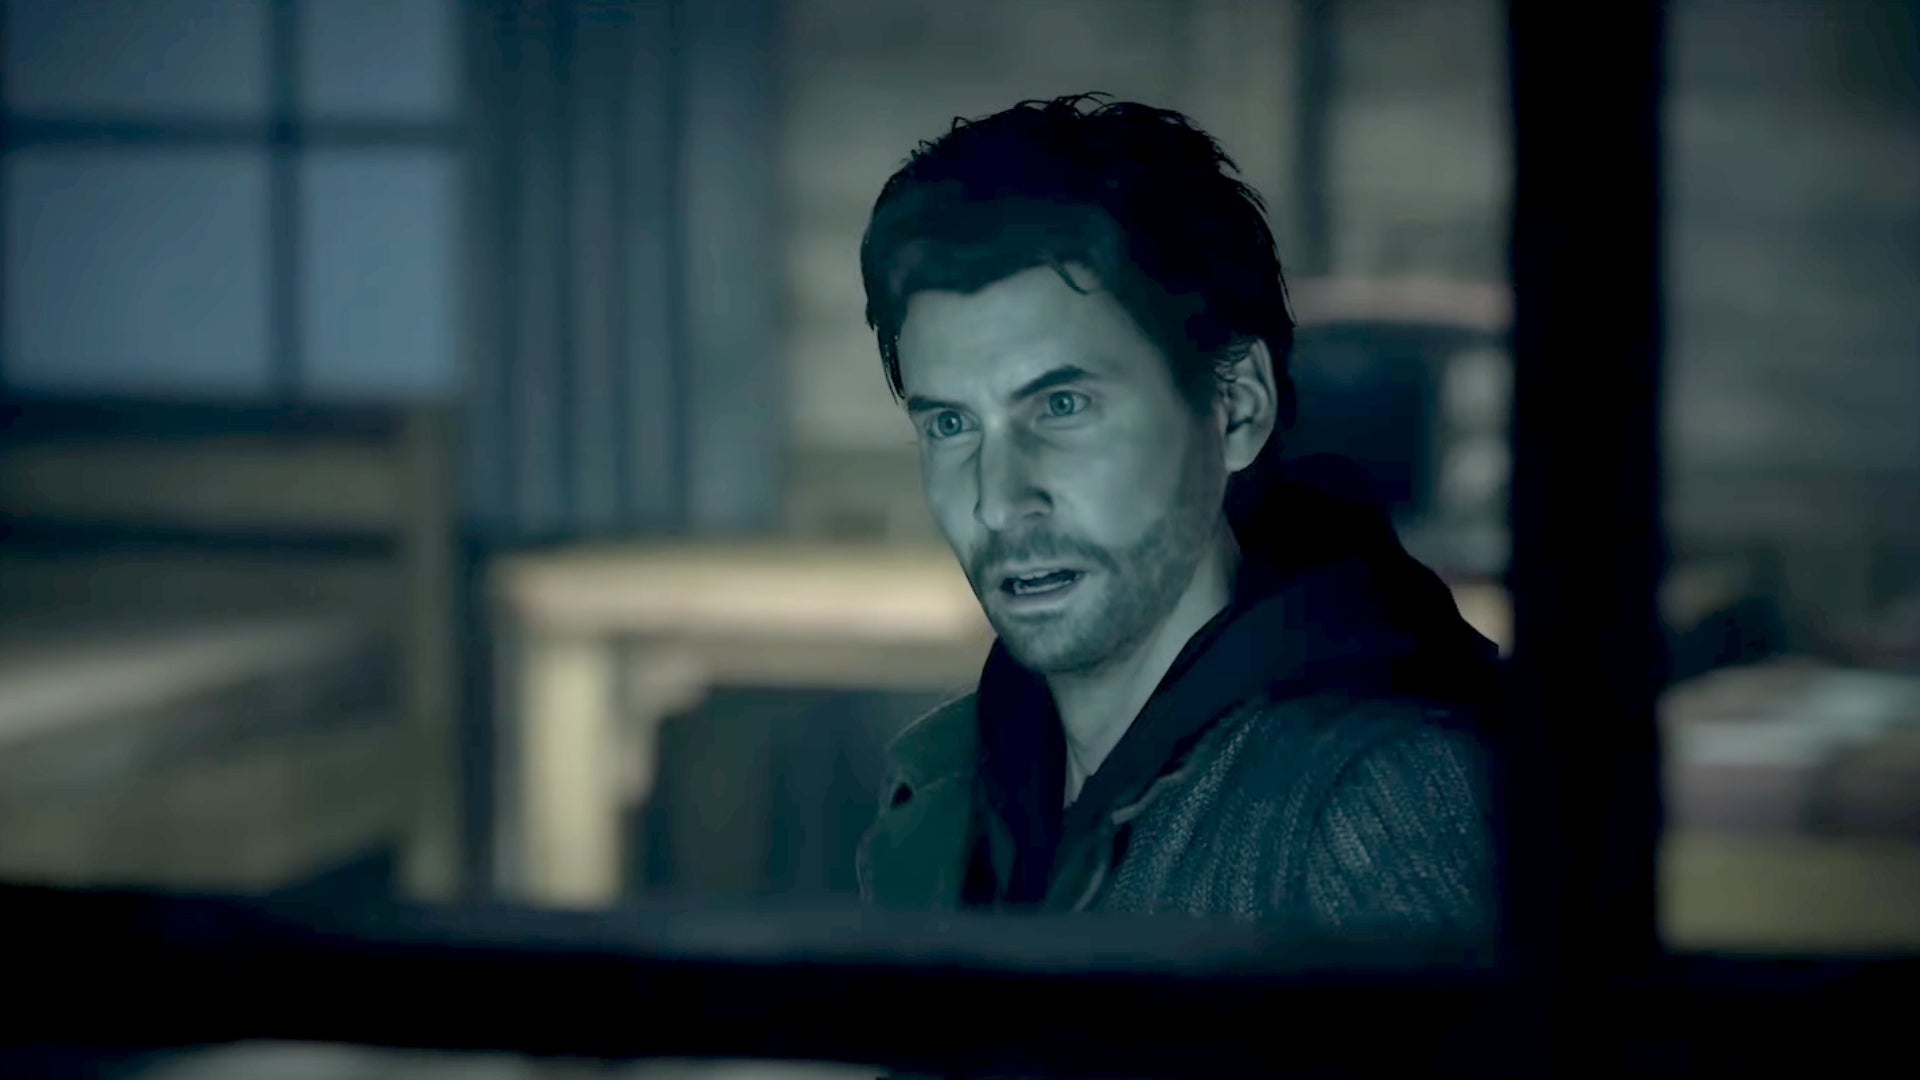 Alan Wake looks out the window with a look of shock or surprise on his face.